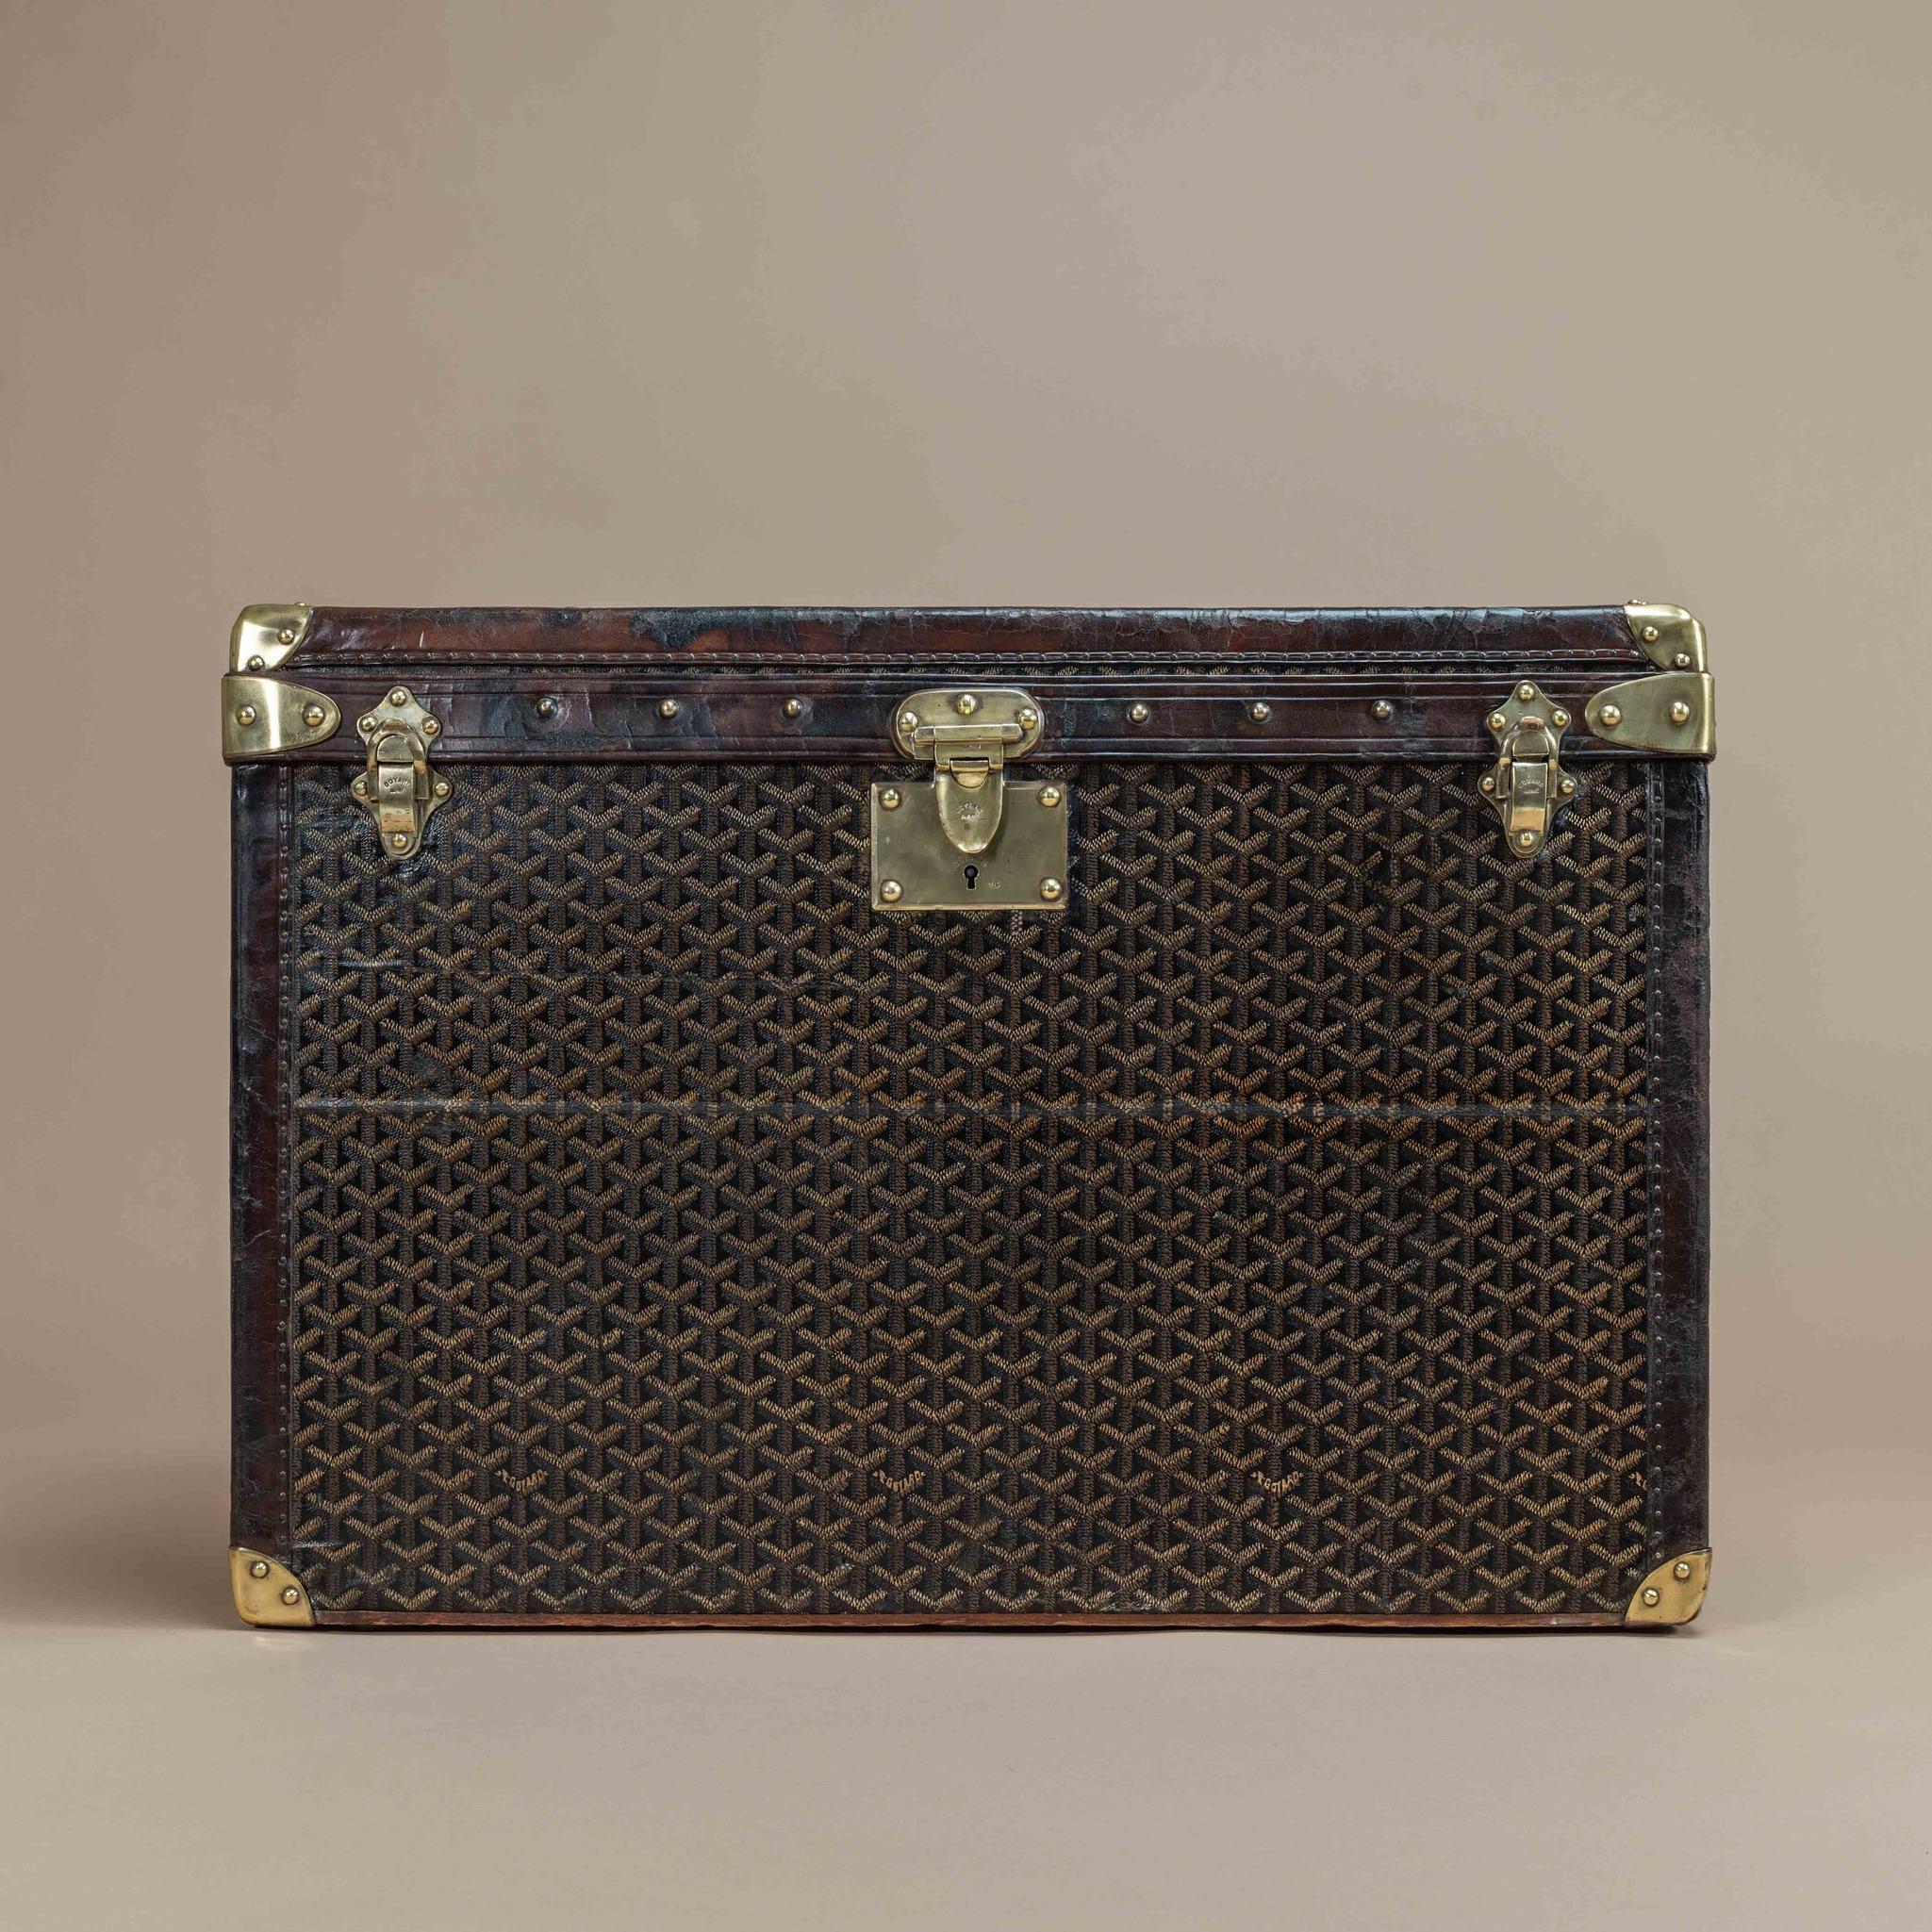 A splendid shoe trunk by Goyard with chevron pattern canvas covering, leather handles & trim, and polished brass fittings; circa 1900. The interior has the original lining and all the felt lined trays.

Dimensions: 65.5 cm/25¾ inches (width) x